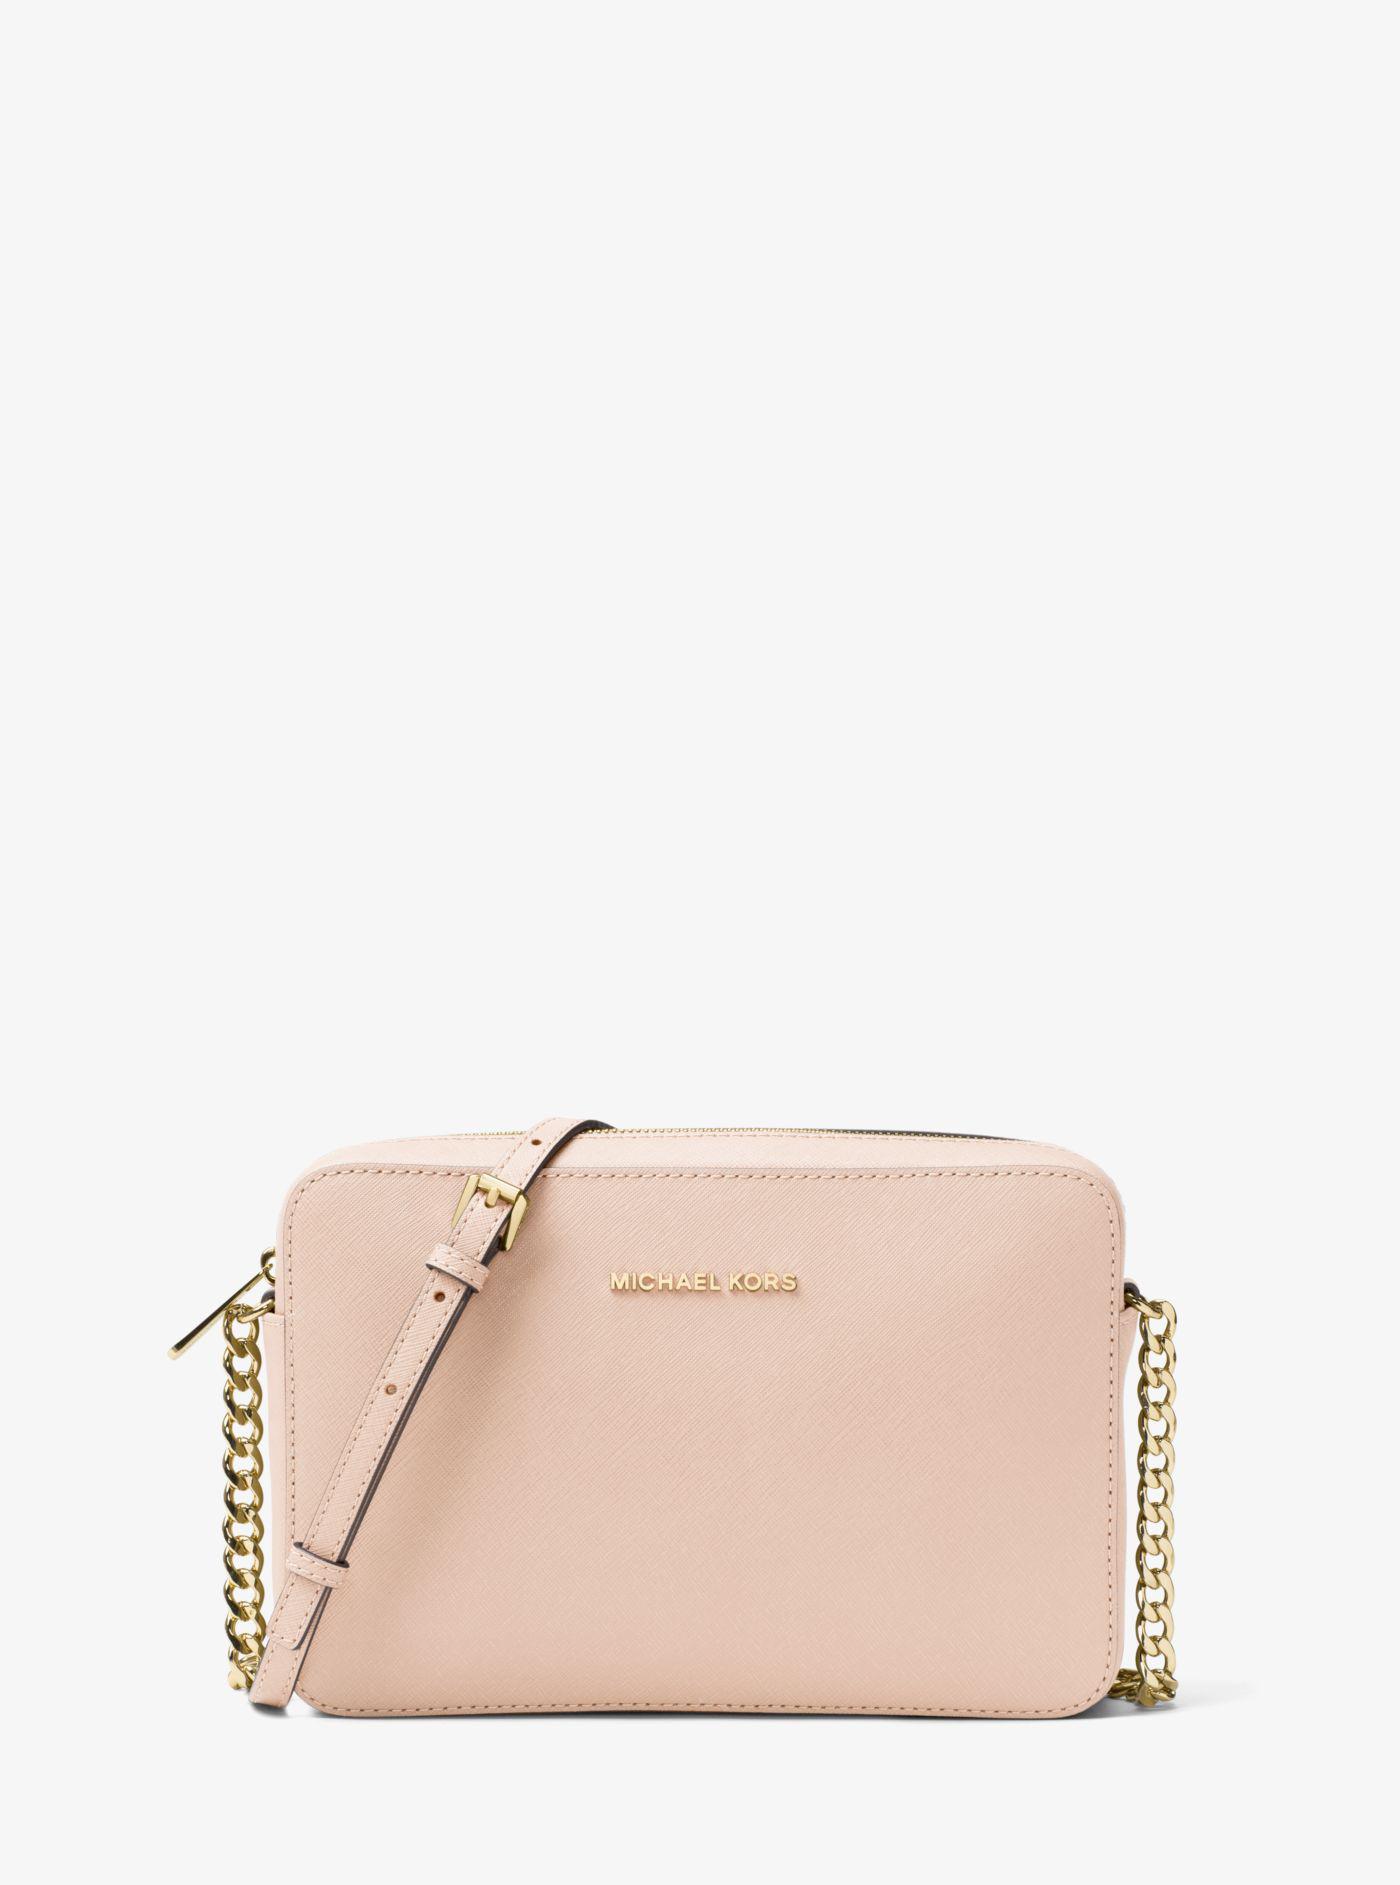 Lyst - Michael Kors Jet Set Large Saffiano Leather Crossbody in Pink